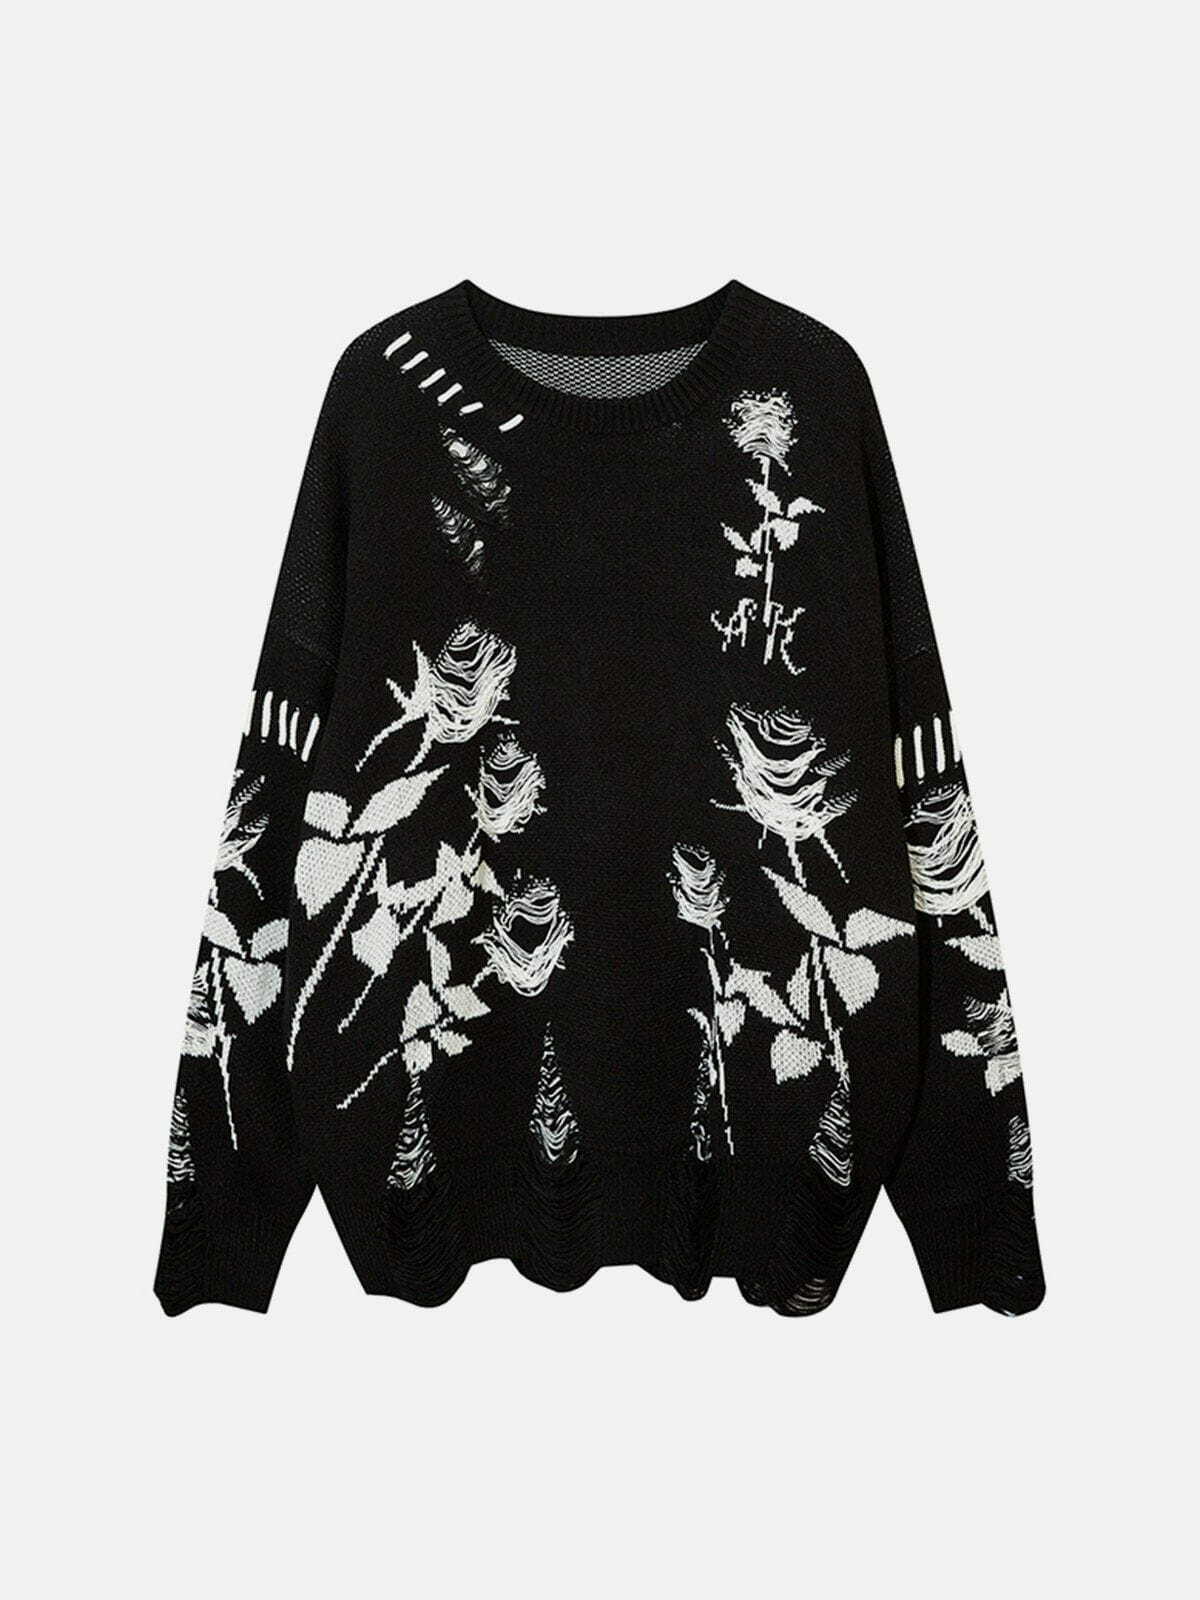 raw edge rose sweater quirky floral streetwear 7735